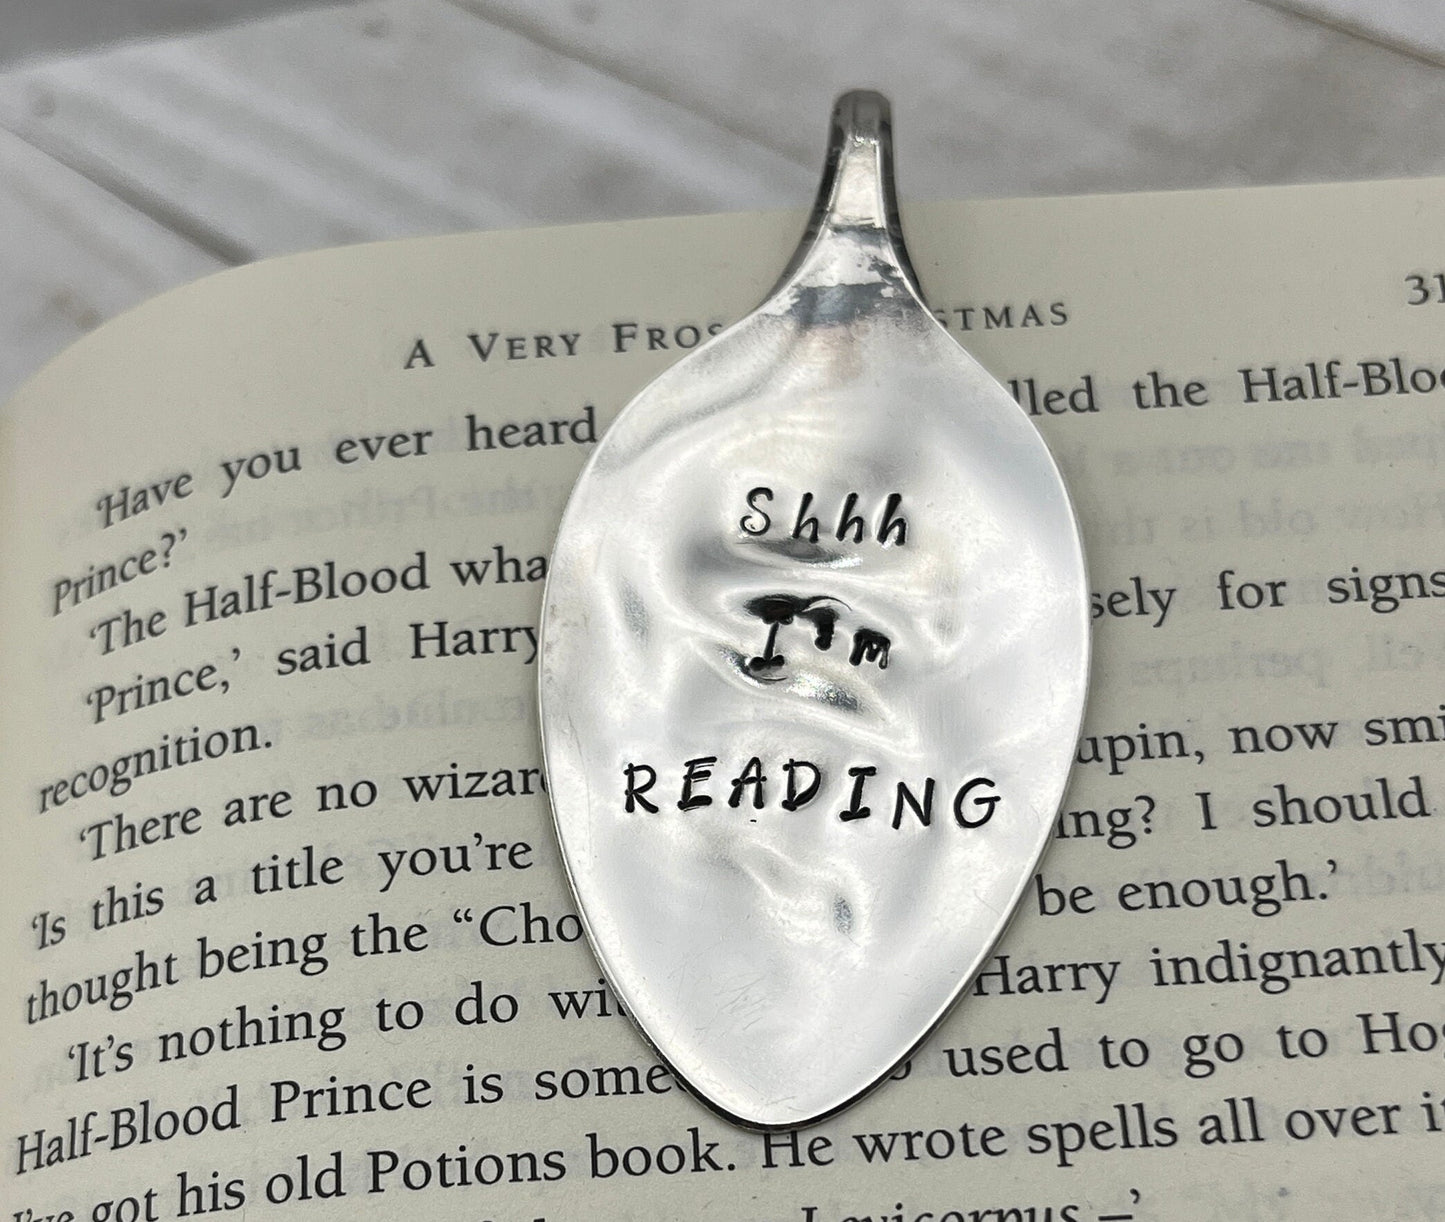 Upcycled and Repurposed Silver Spoon Bookmark - "Shhh, I'm Reading" - Hand Stamped Vintage Silverware Book Lover, Teacher, Librarian Gift